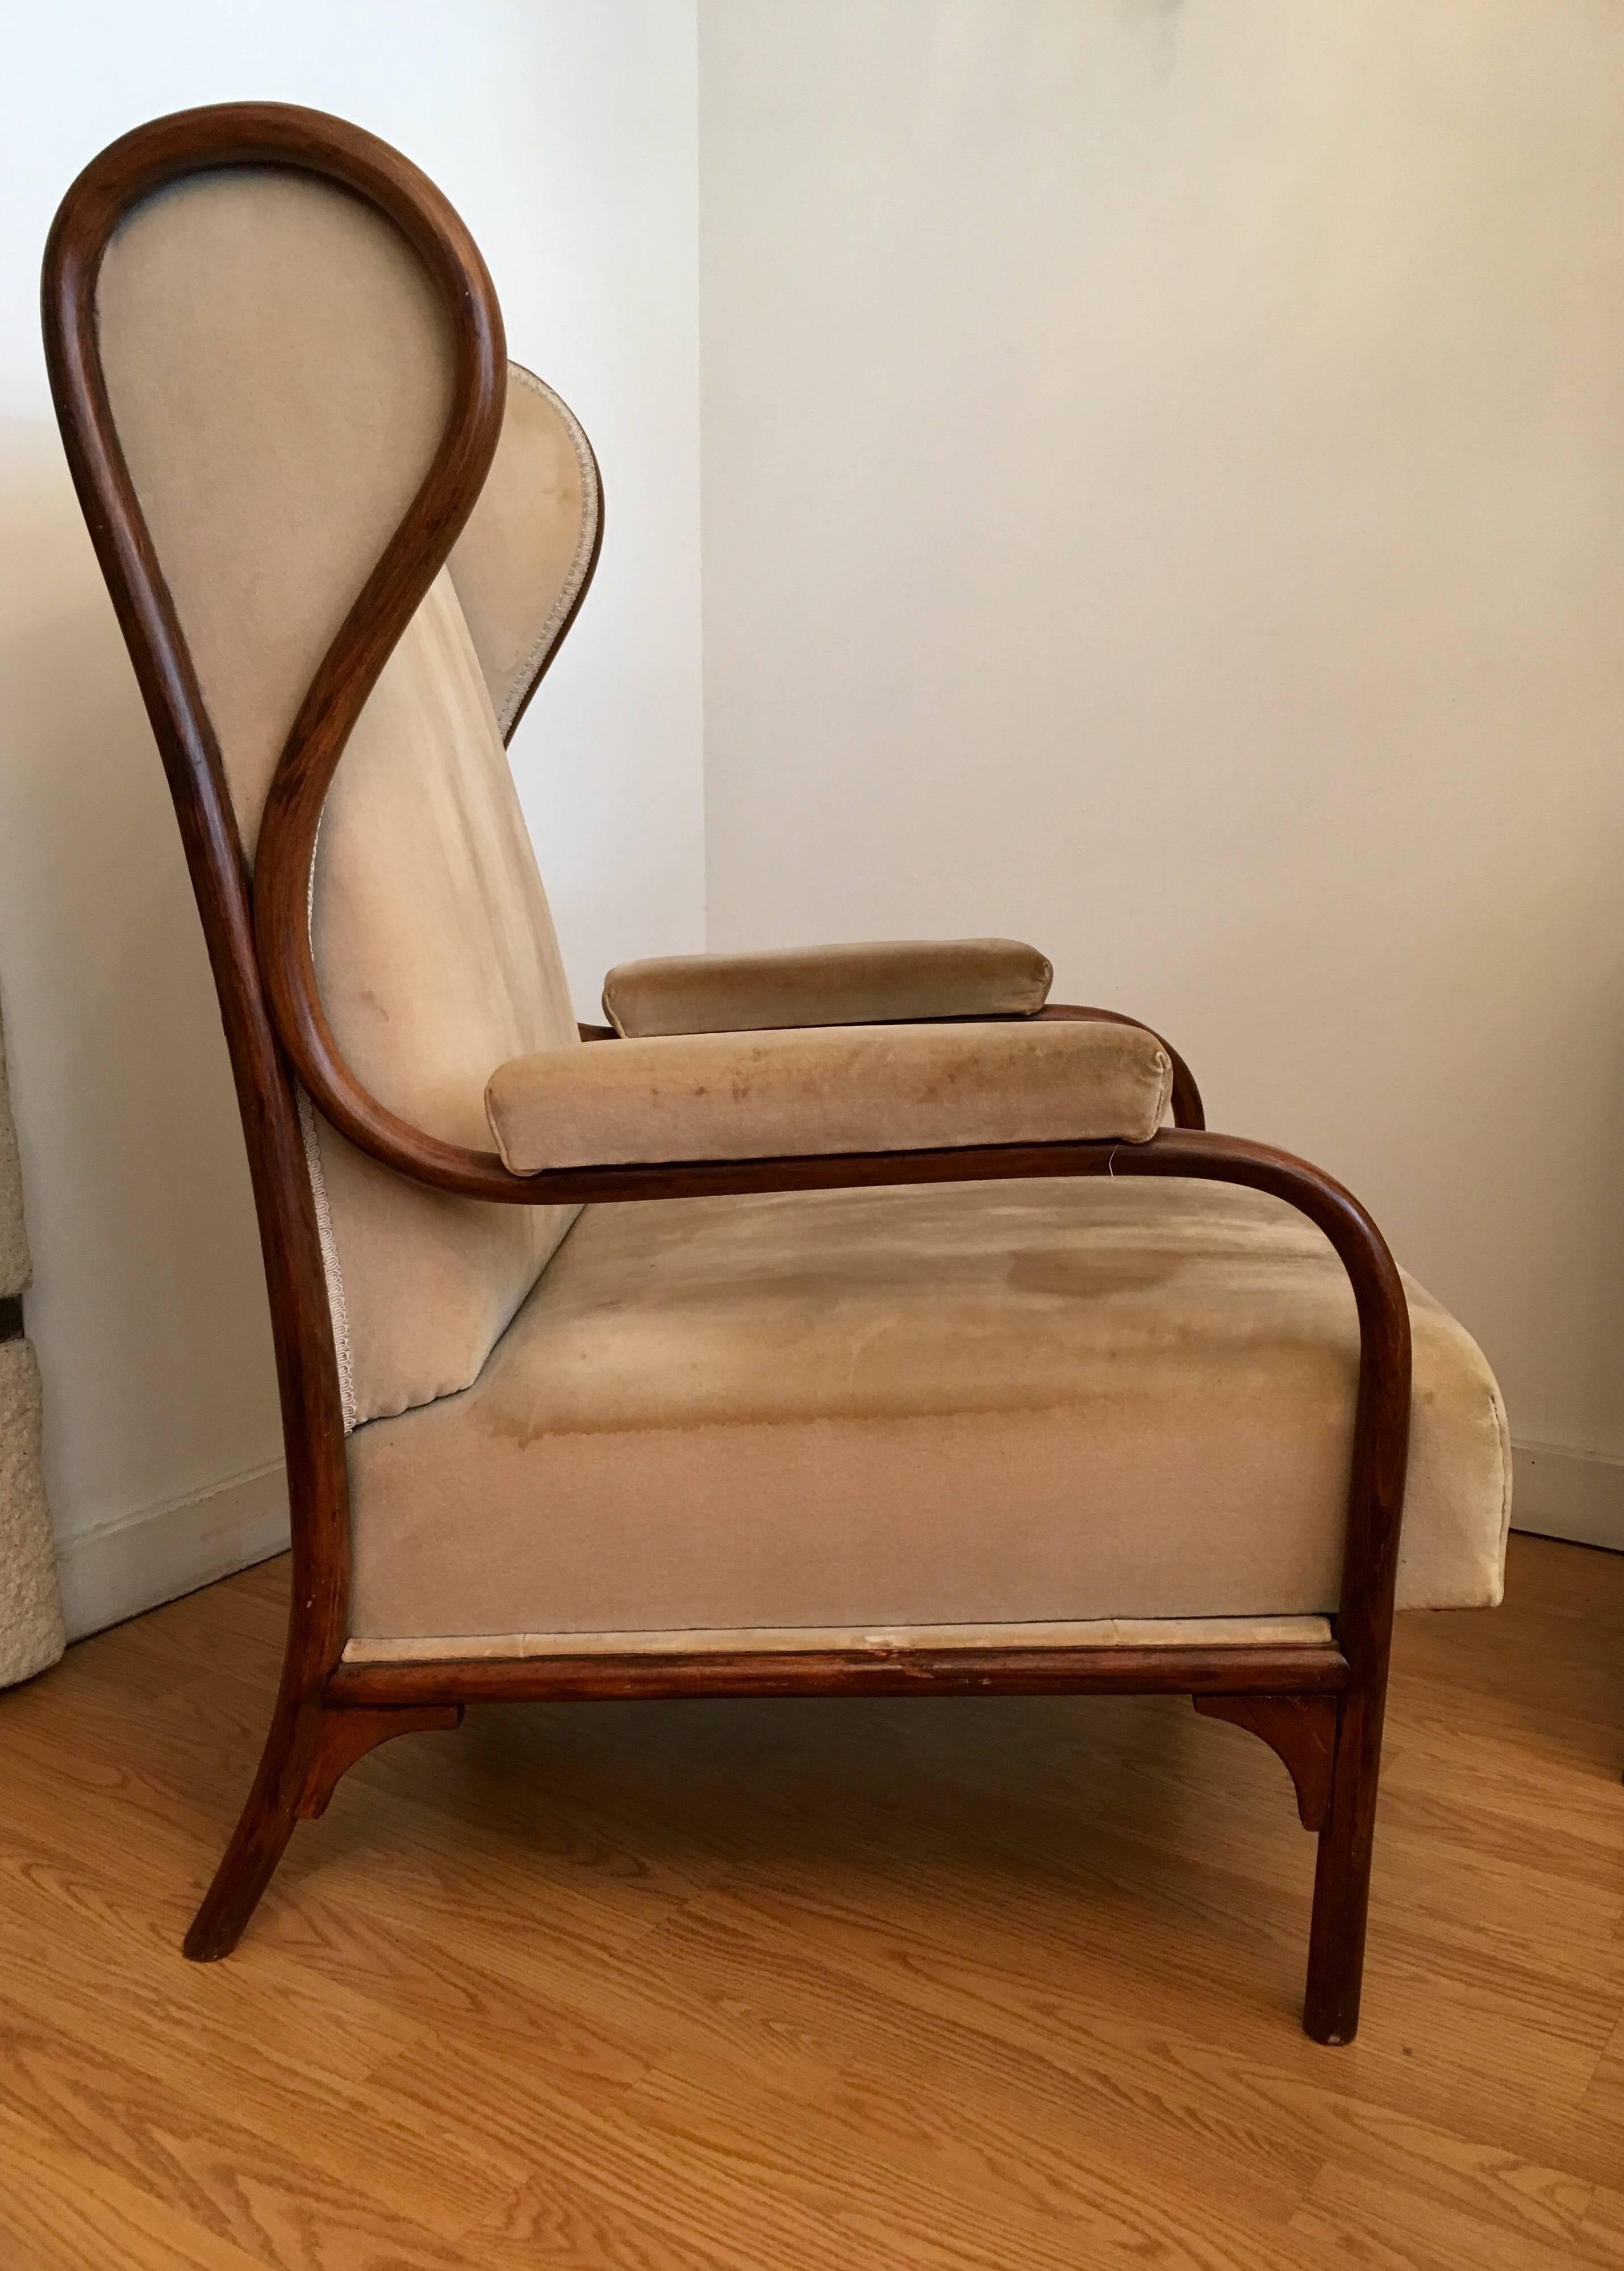 Vienna Secession Gebruder Thonet Model 6541 Wing Chair